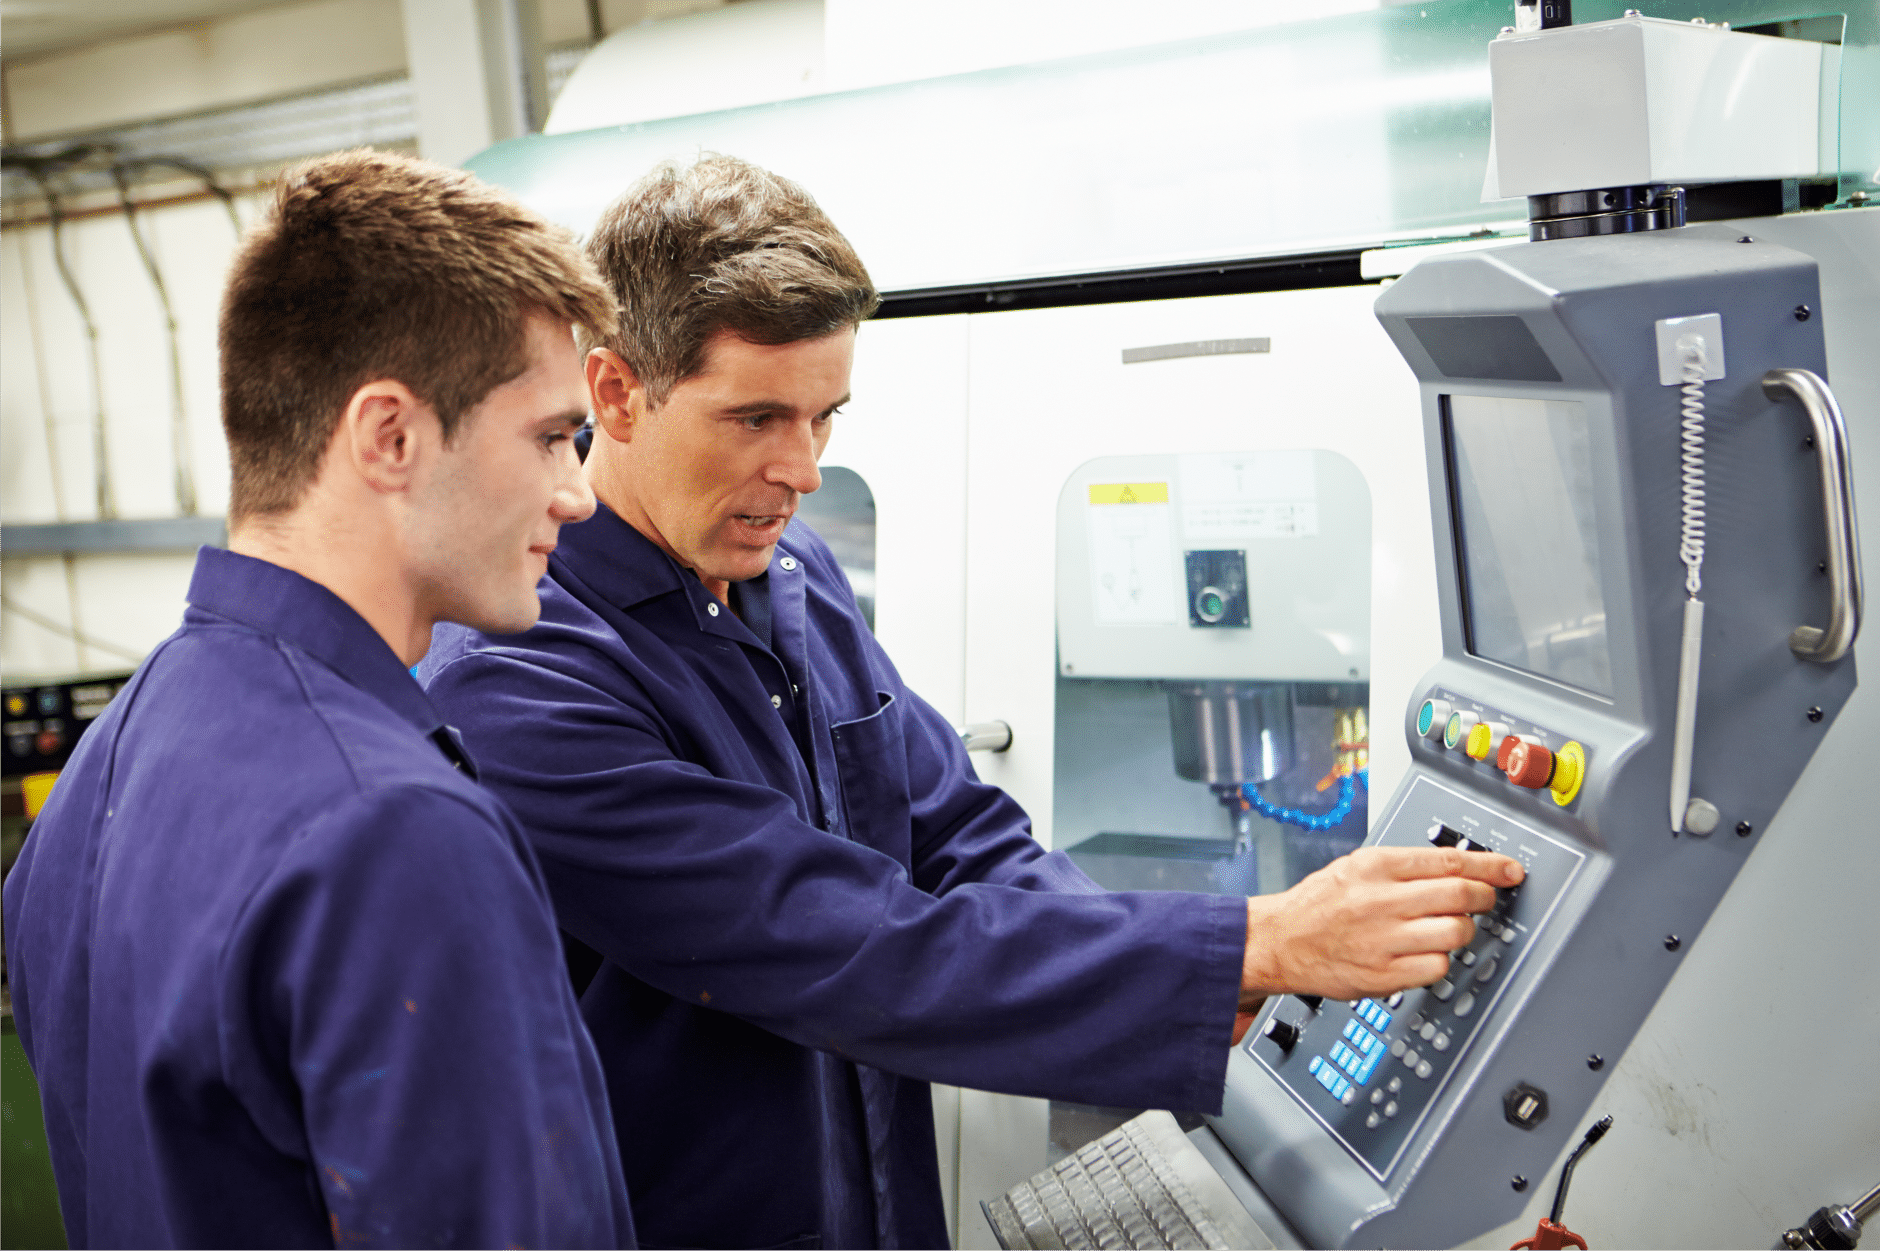 Making manufacturing accessible and enabling young talent